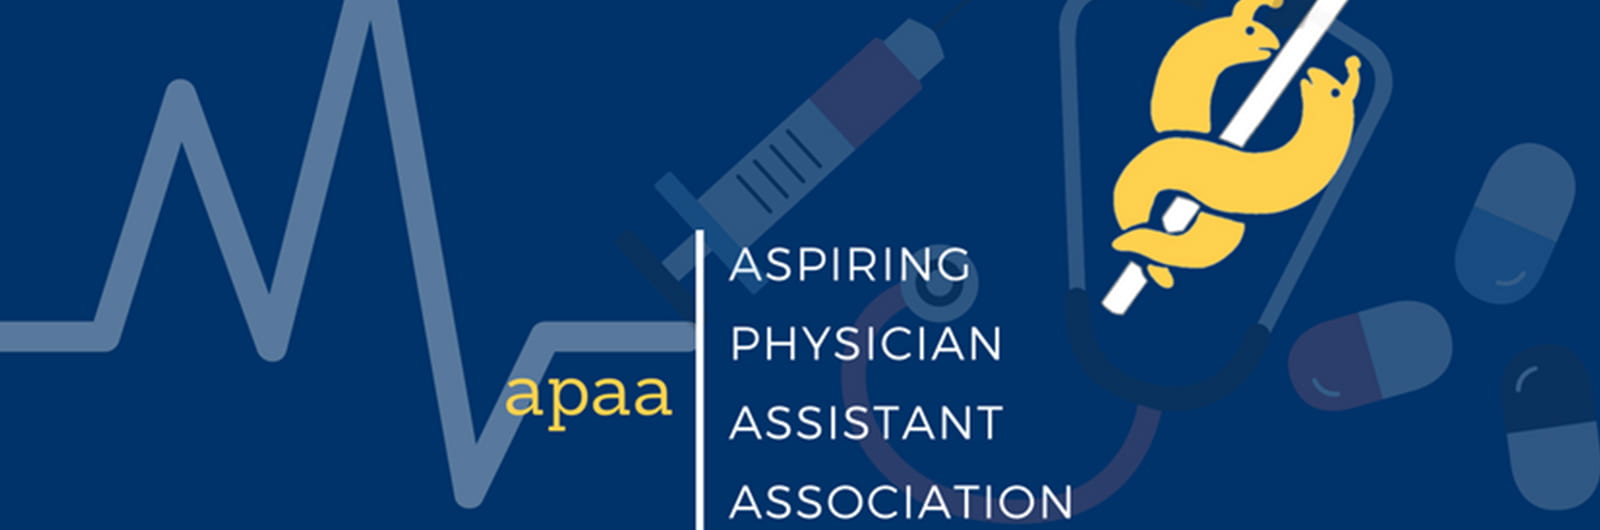 Drawings of entwined banana slugs and medication next to text "Aspiring Physician Assistant Association (APAA)"